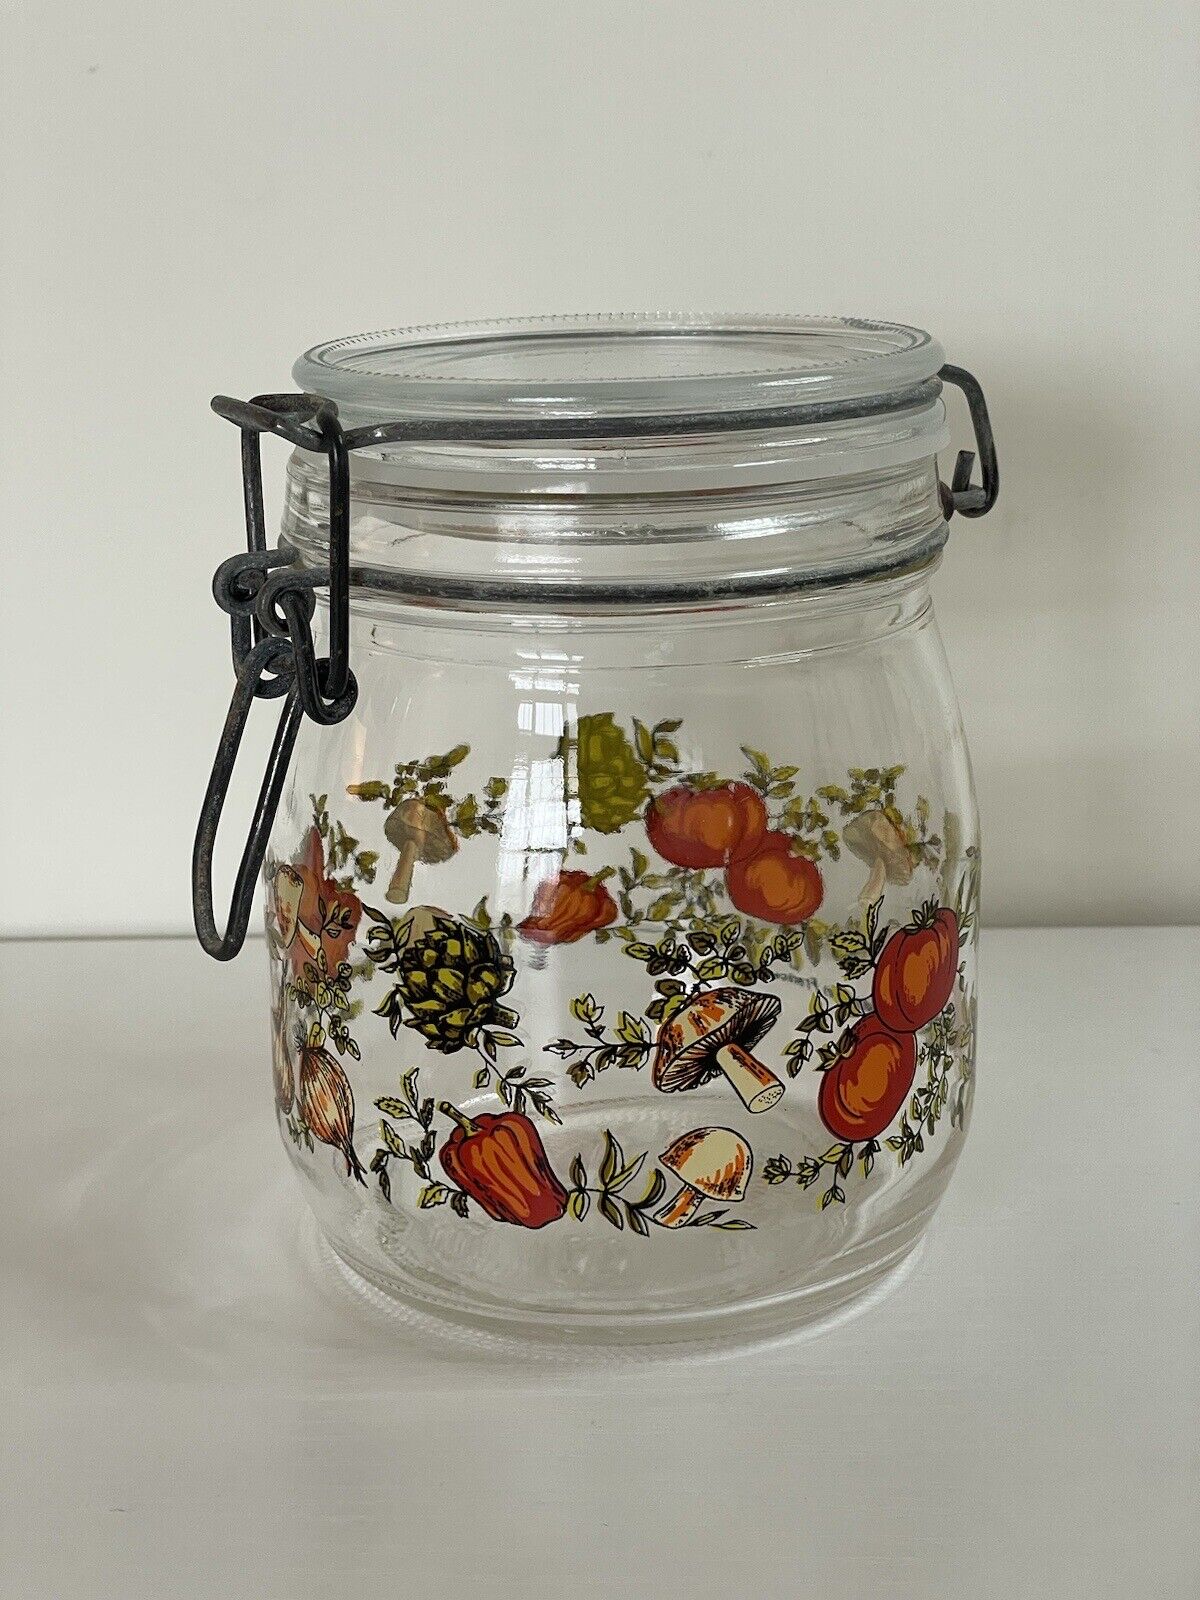 Vintage Bail Jar Vegetables Flowers Canister Canning With Lid Glass Seal Unique